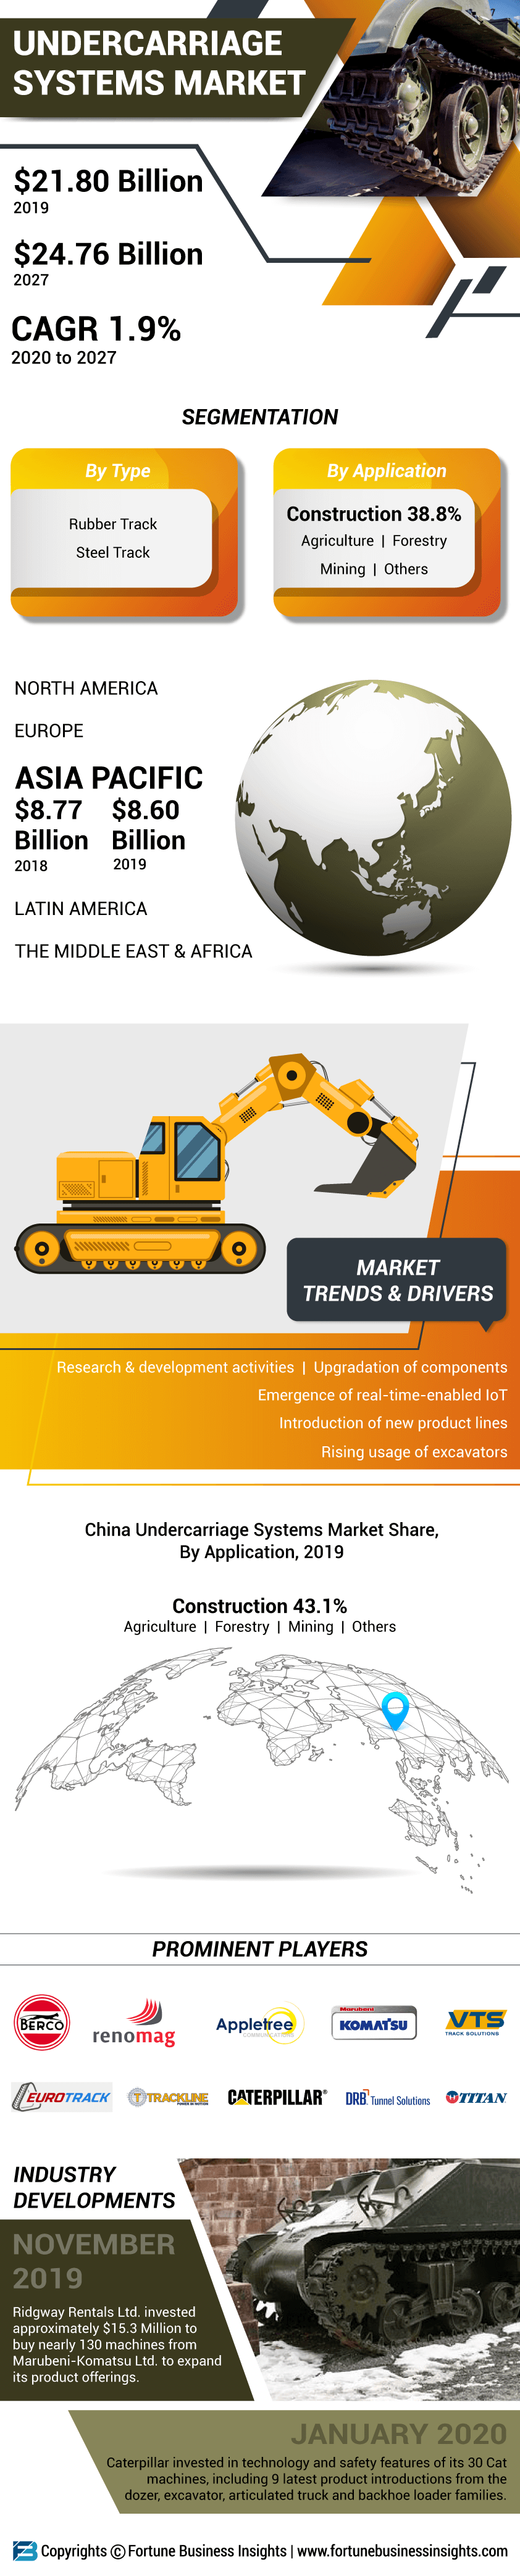 Undercarriage Systems Market